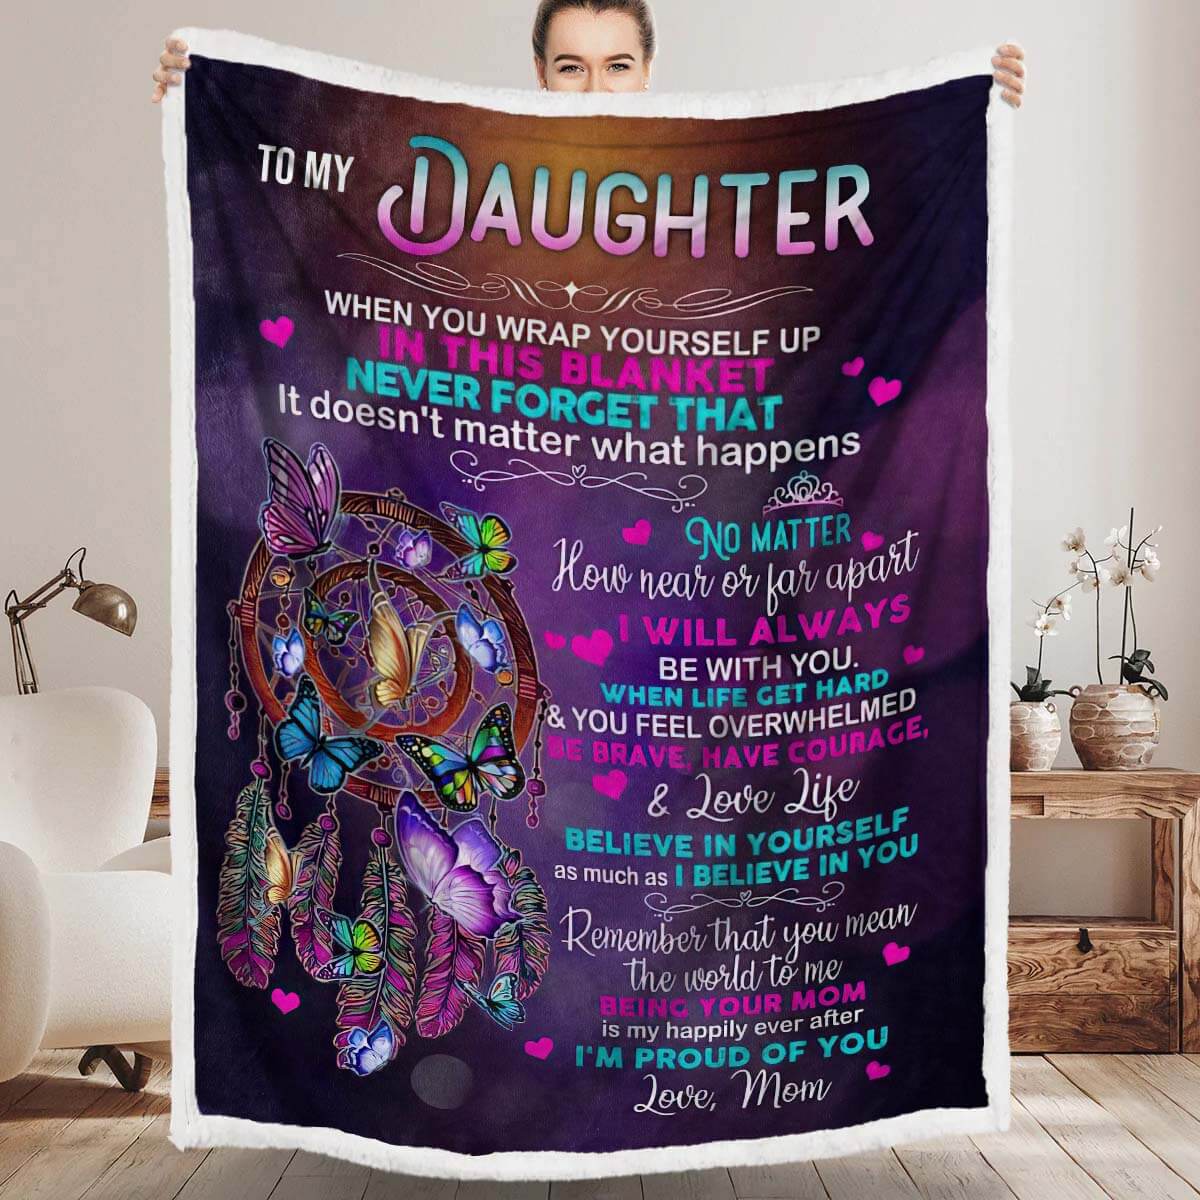 Special Gift For Your Daughter On A Birthday or For Your Daughter Living Far From Home - A651 - Premium Blanket